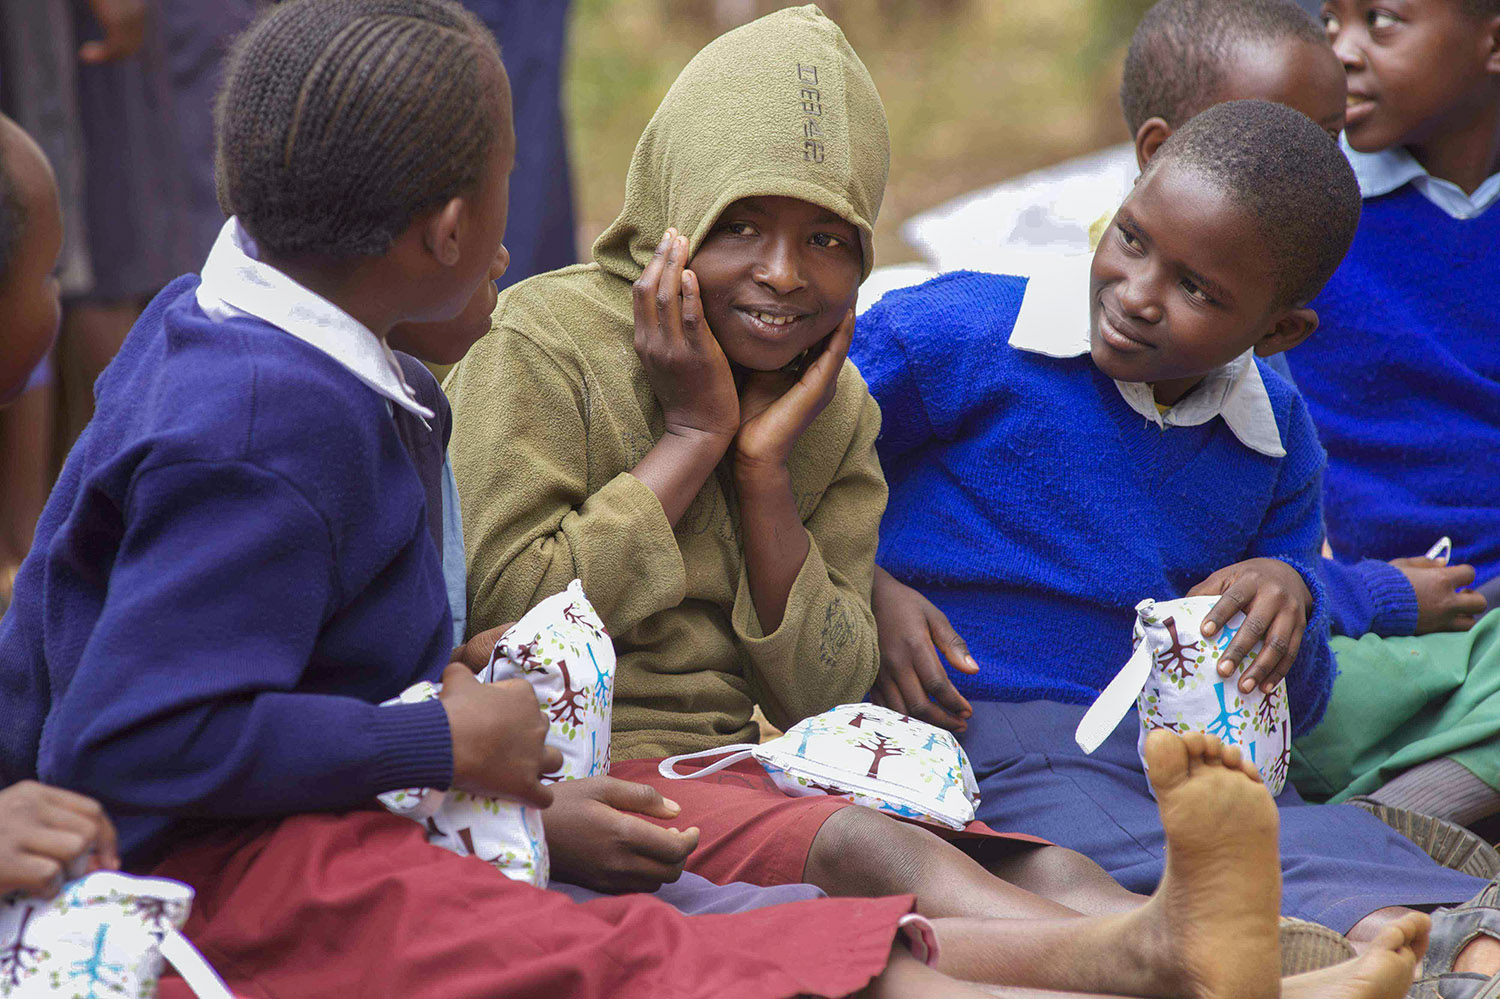 Kinyua is collaborating with Molly Secor-Turner, a professor at the School of Nursing at North Dakota State University on a menstrual health management system for girls in Kenya. Photo: Kate Lapides